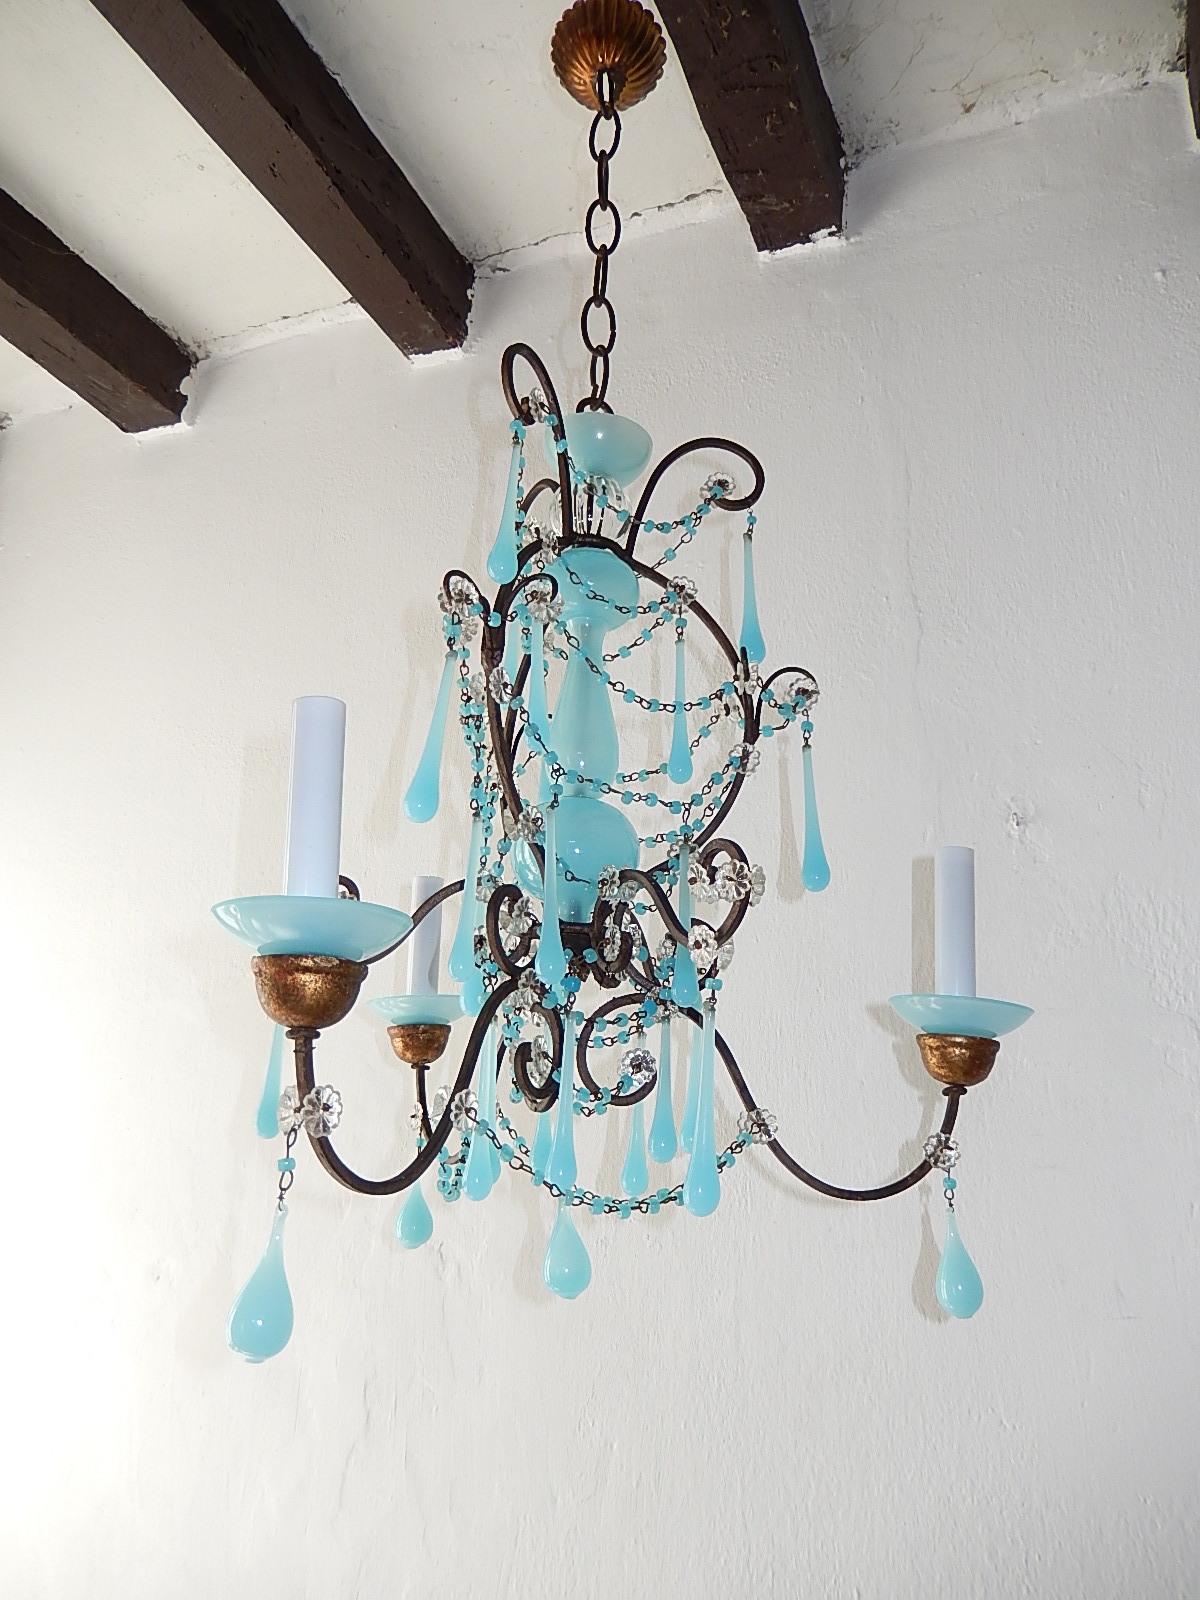 Housing 3-light sitting in blue opaline bobeches on gold gilt posts. Rewired and ready to hang. Adorning swags of blue opaline macaroni beads and drops. Rare Murano glass in center. Florets throughout. Free priority UPS shipping from Italy. Adding